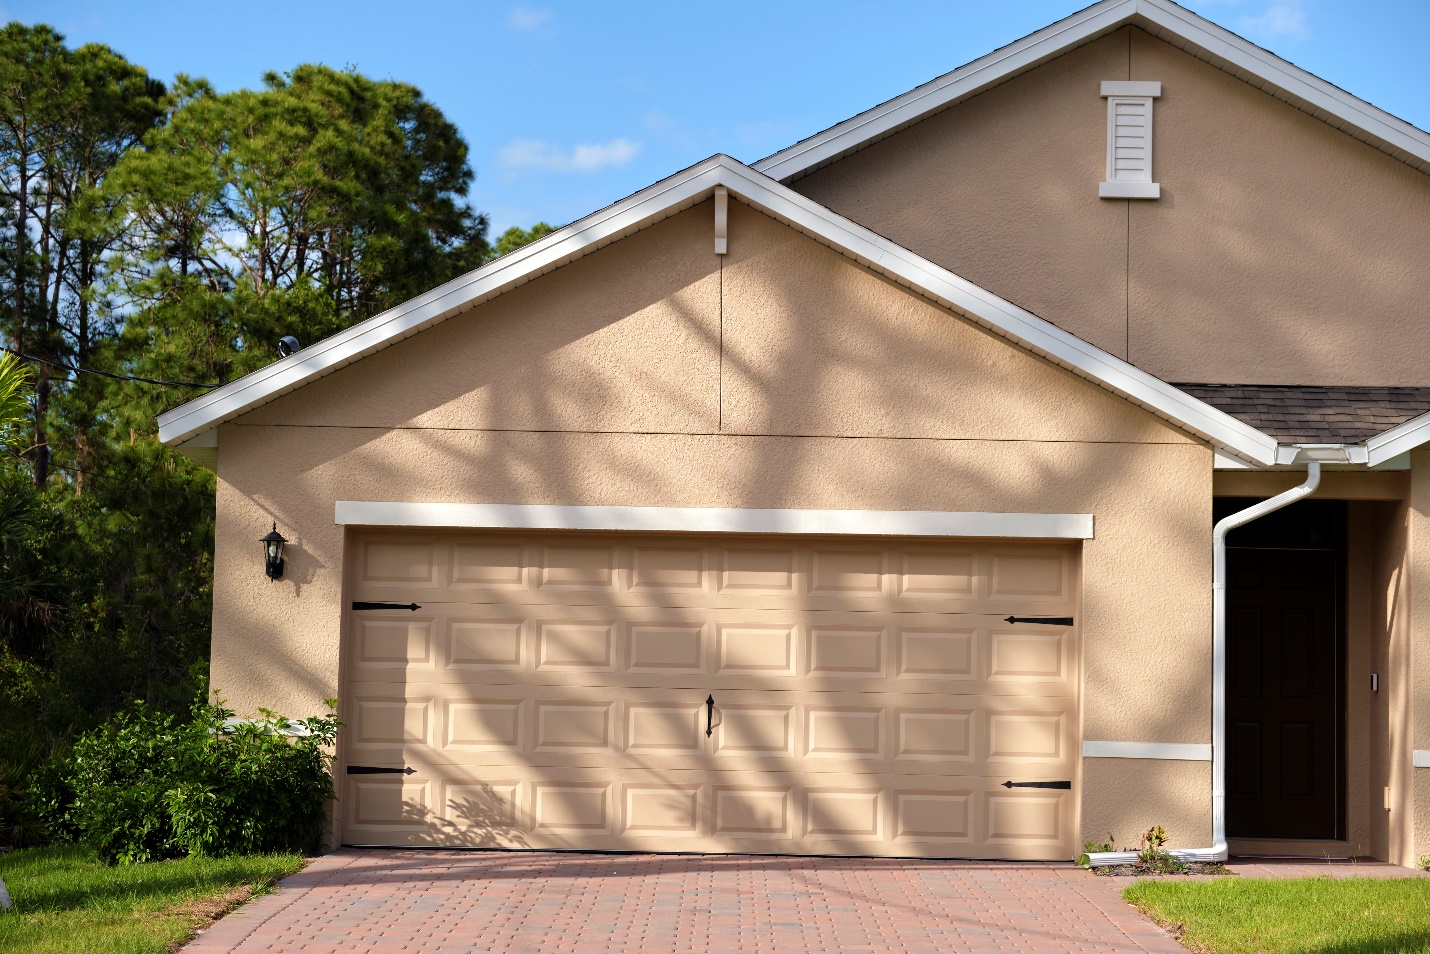 Is It Time to Install a New Garage Door? How to Tell When a New Garage Door is Overdue…